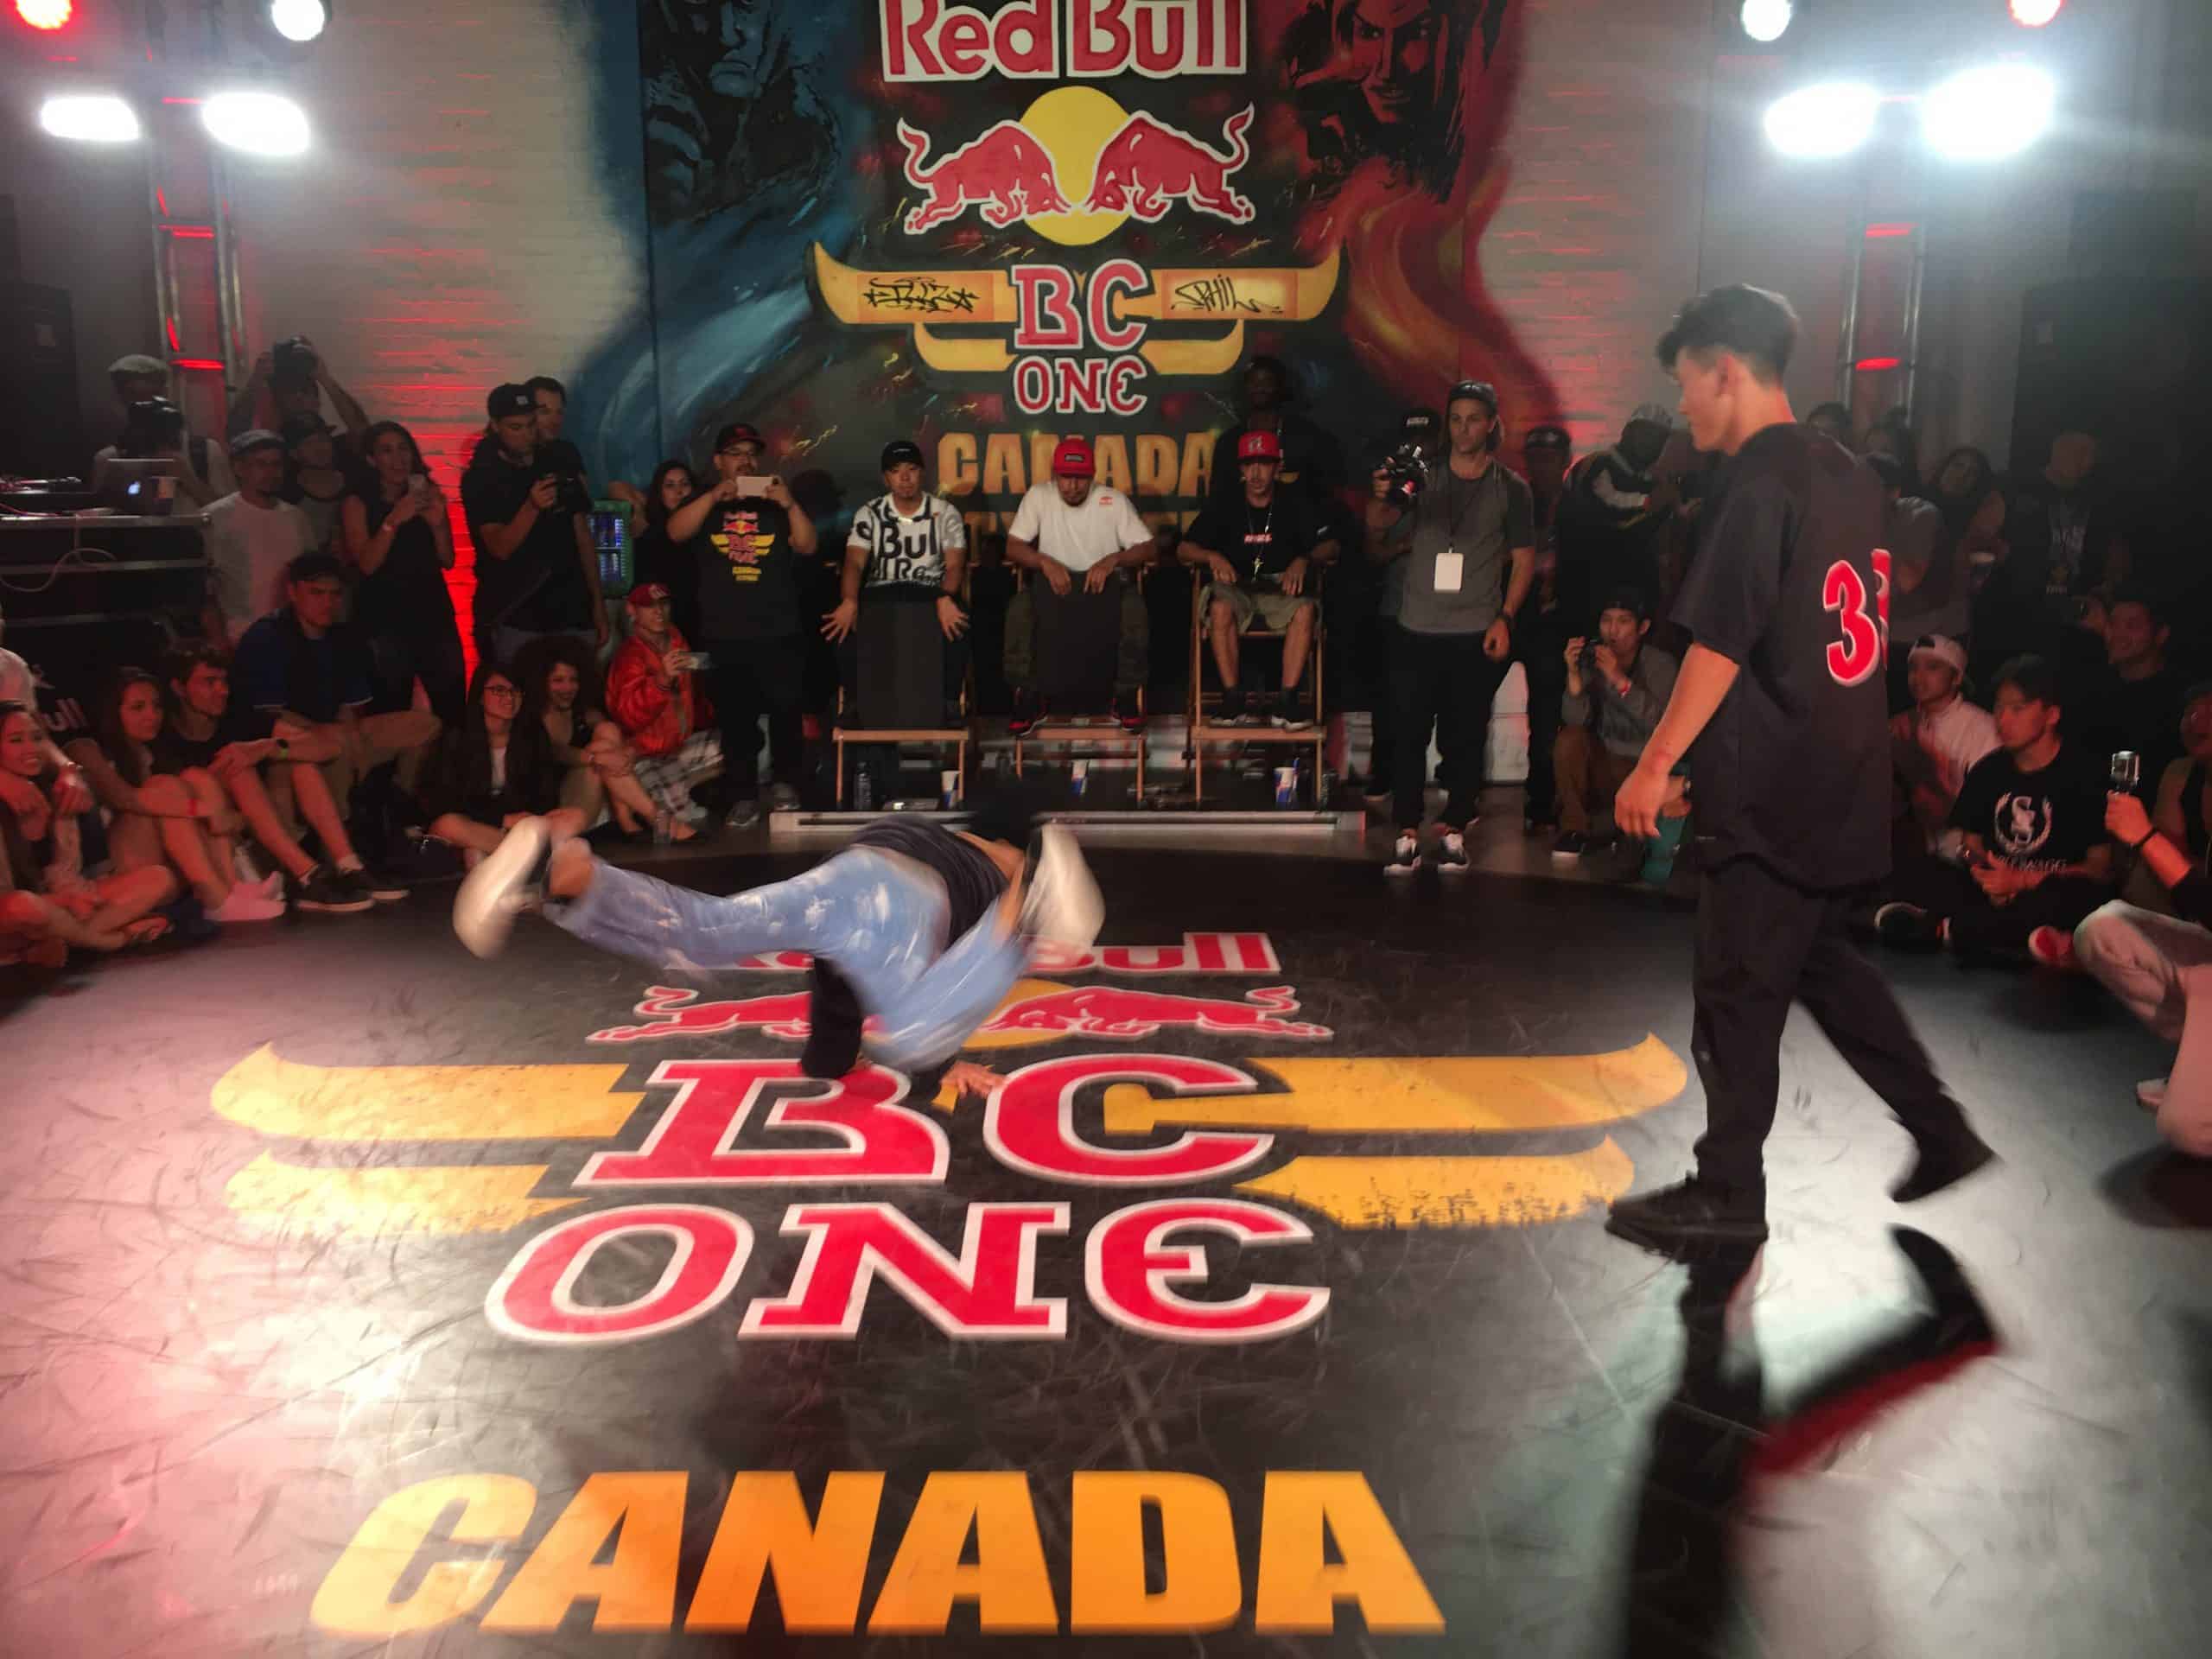 Red Bull BC One Toronto scaled